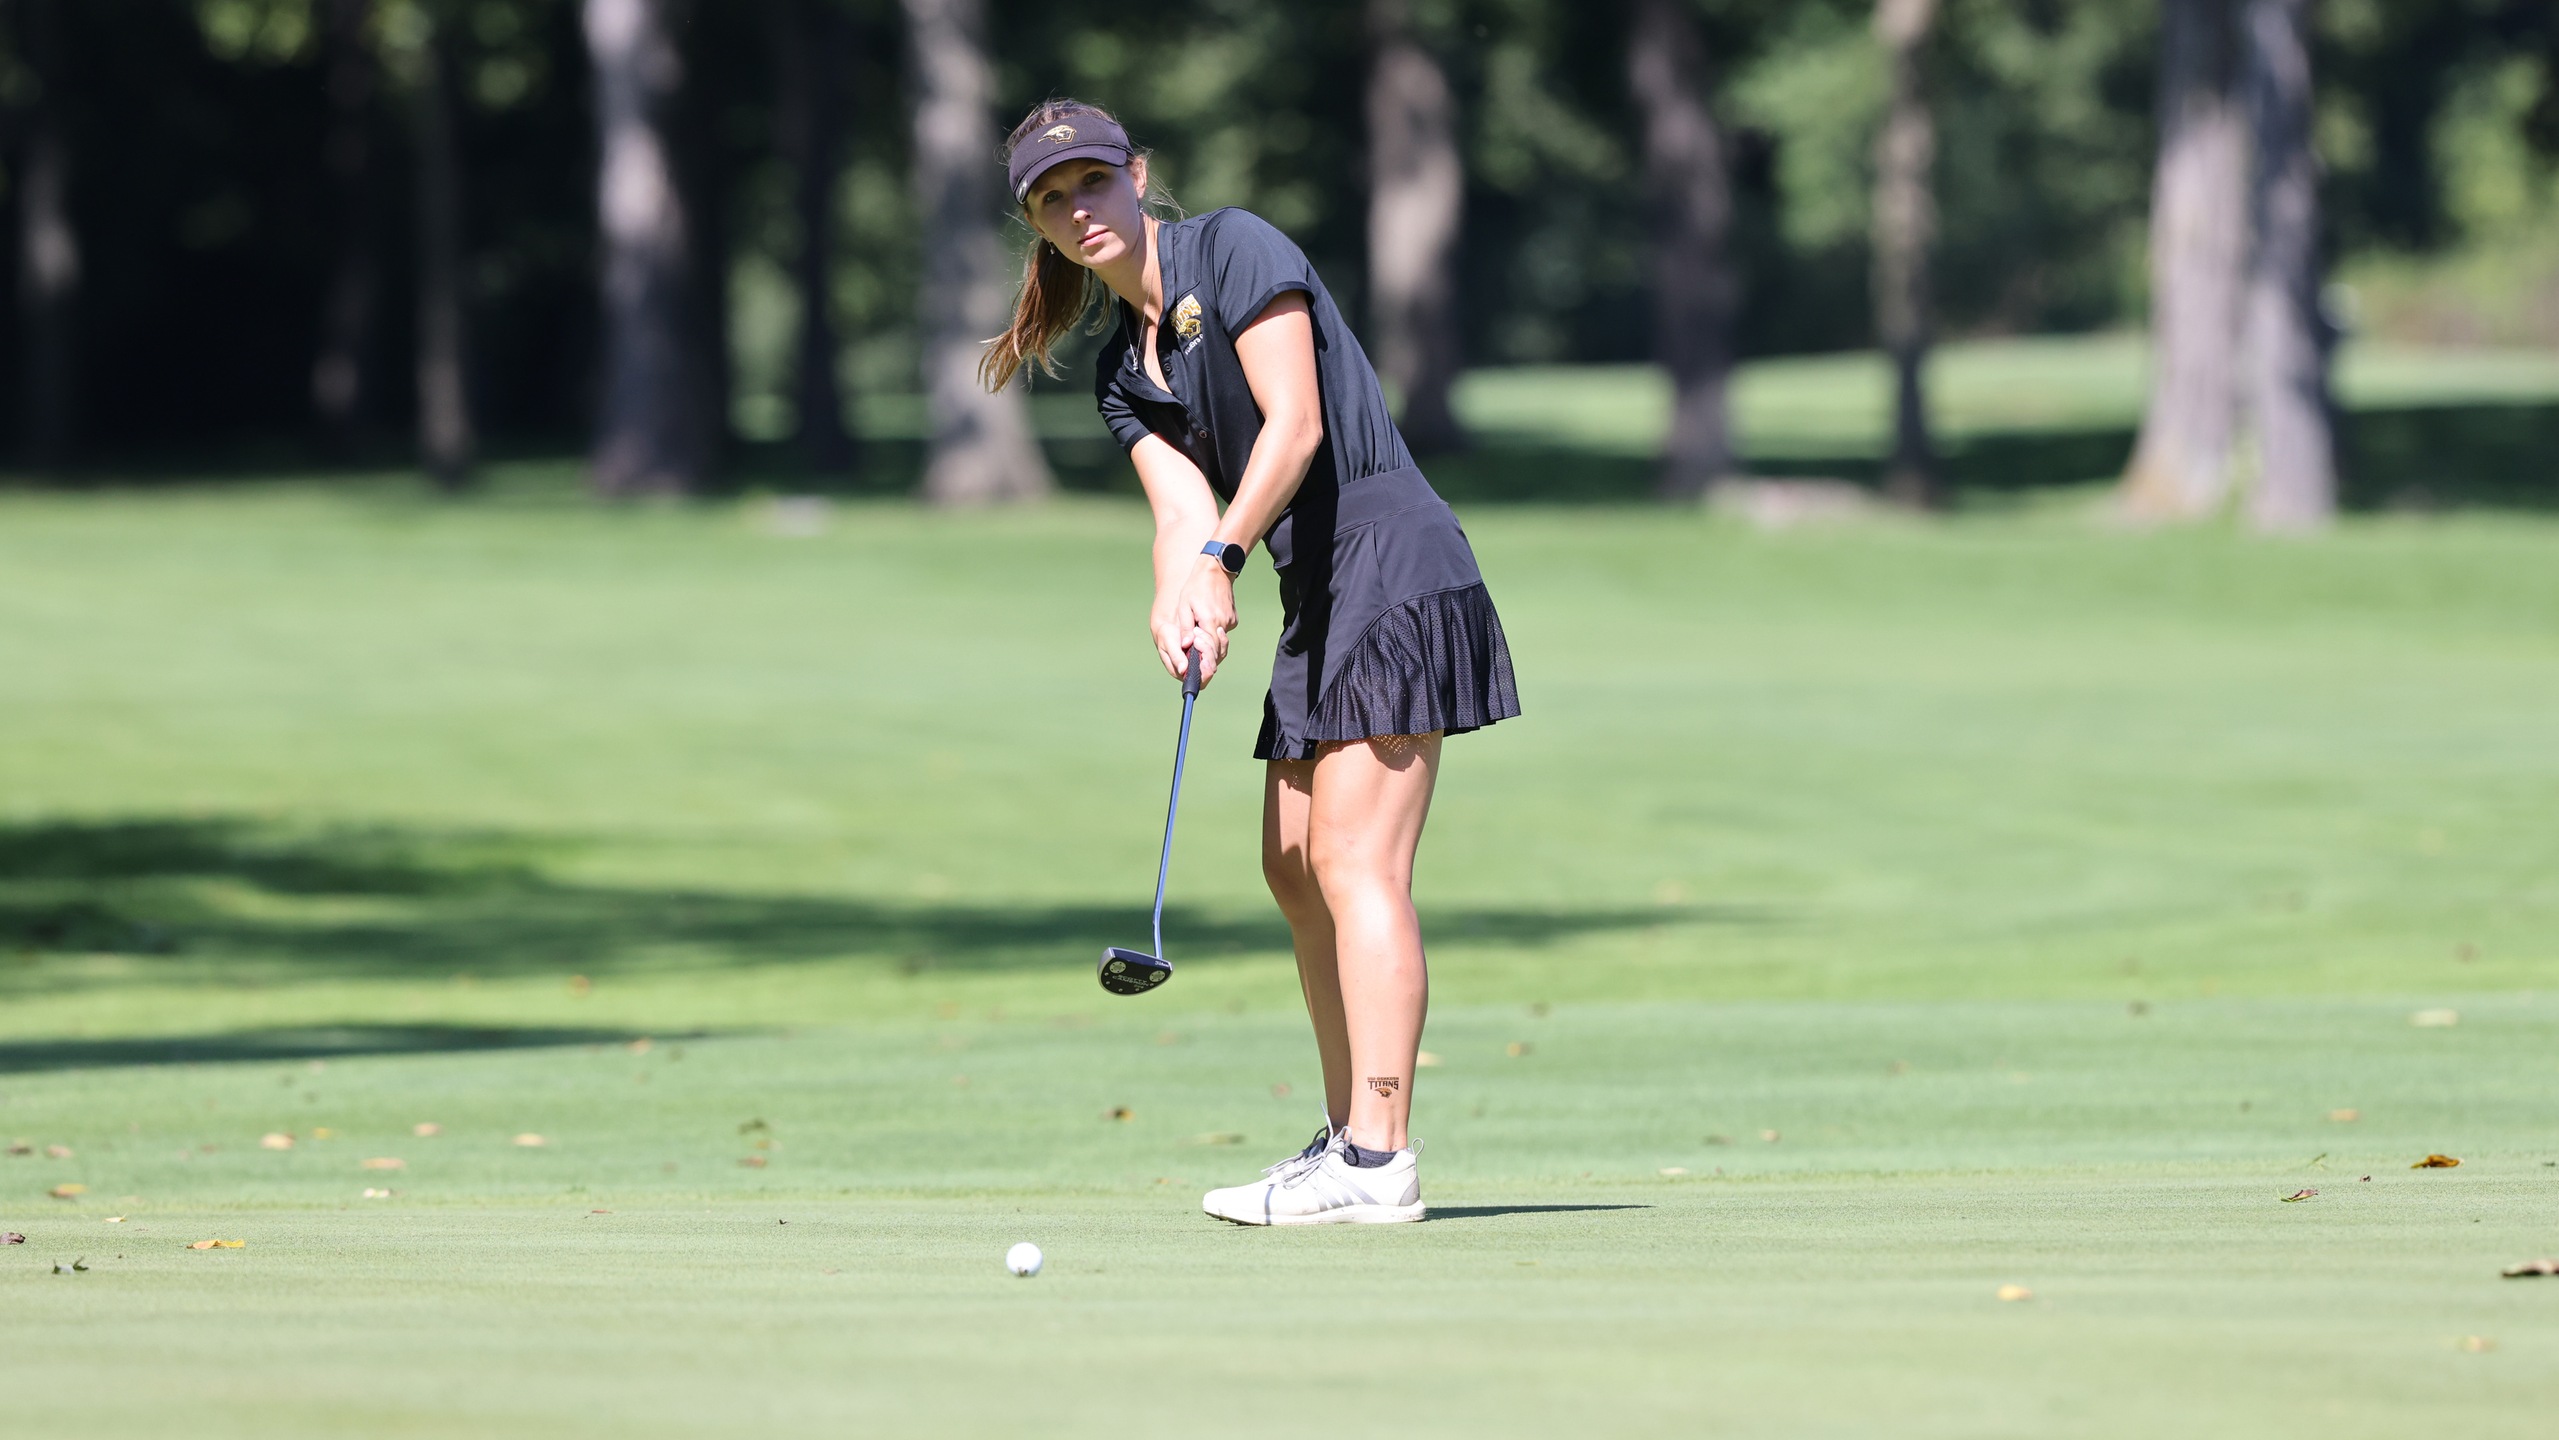 Erika Priebe used 19 pars to finish 25th at the Division III Classic.